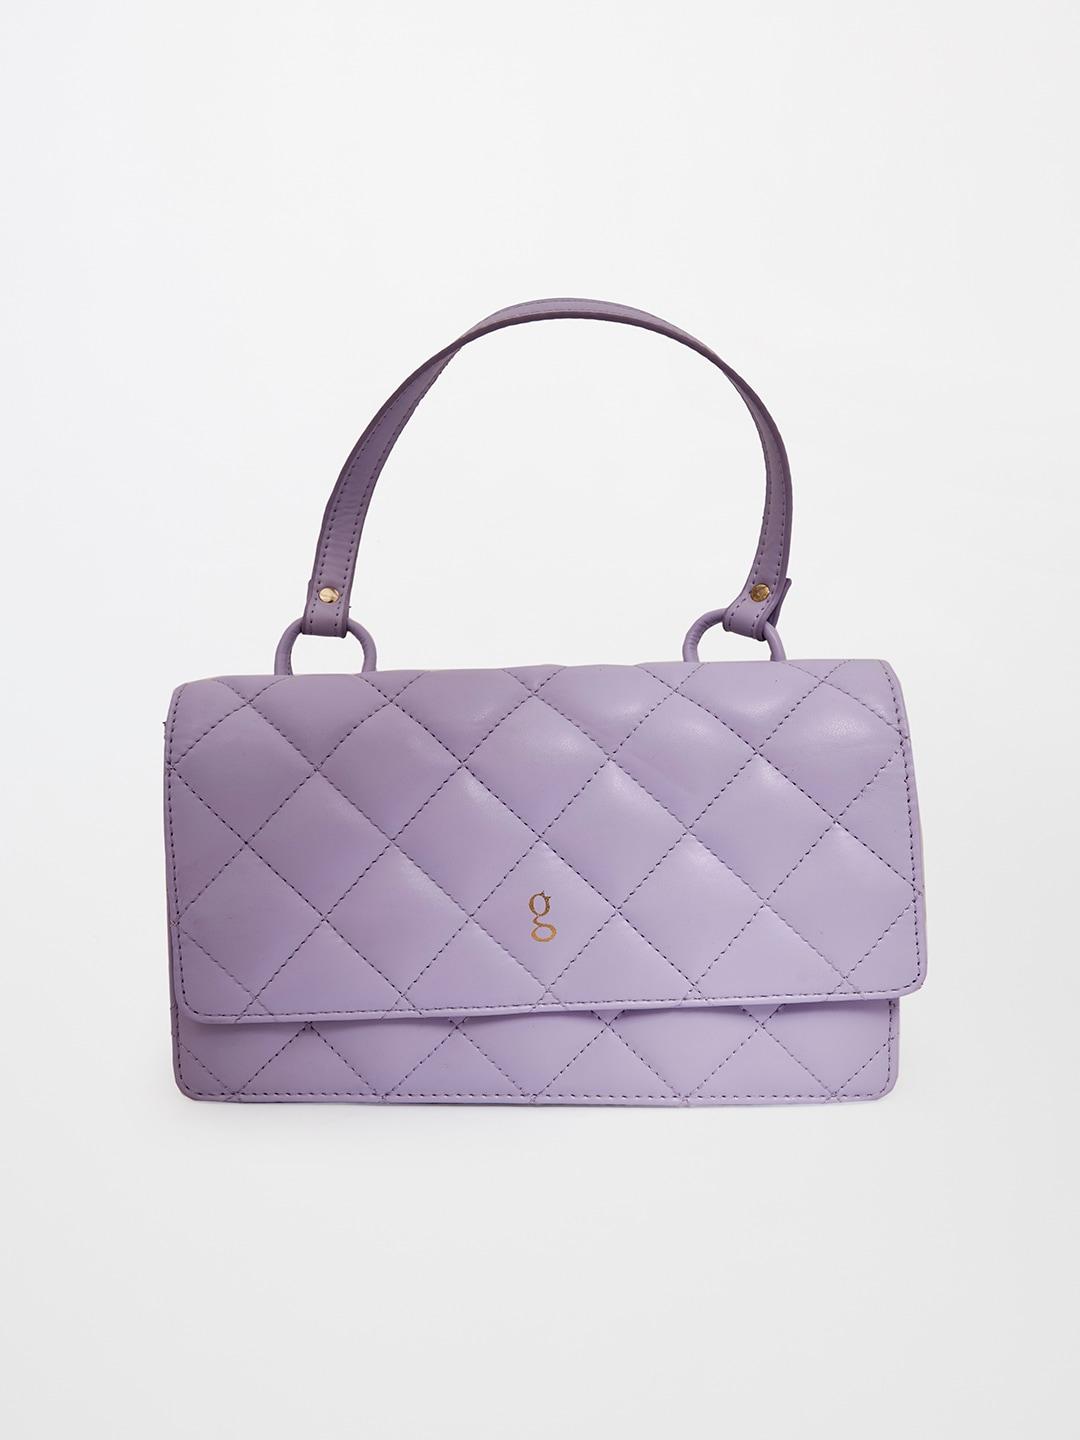 Global Desi Purple Textured Structured Handheld Bag with Quilted